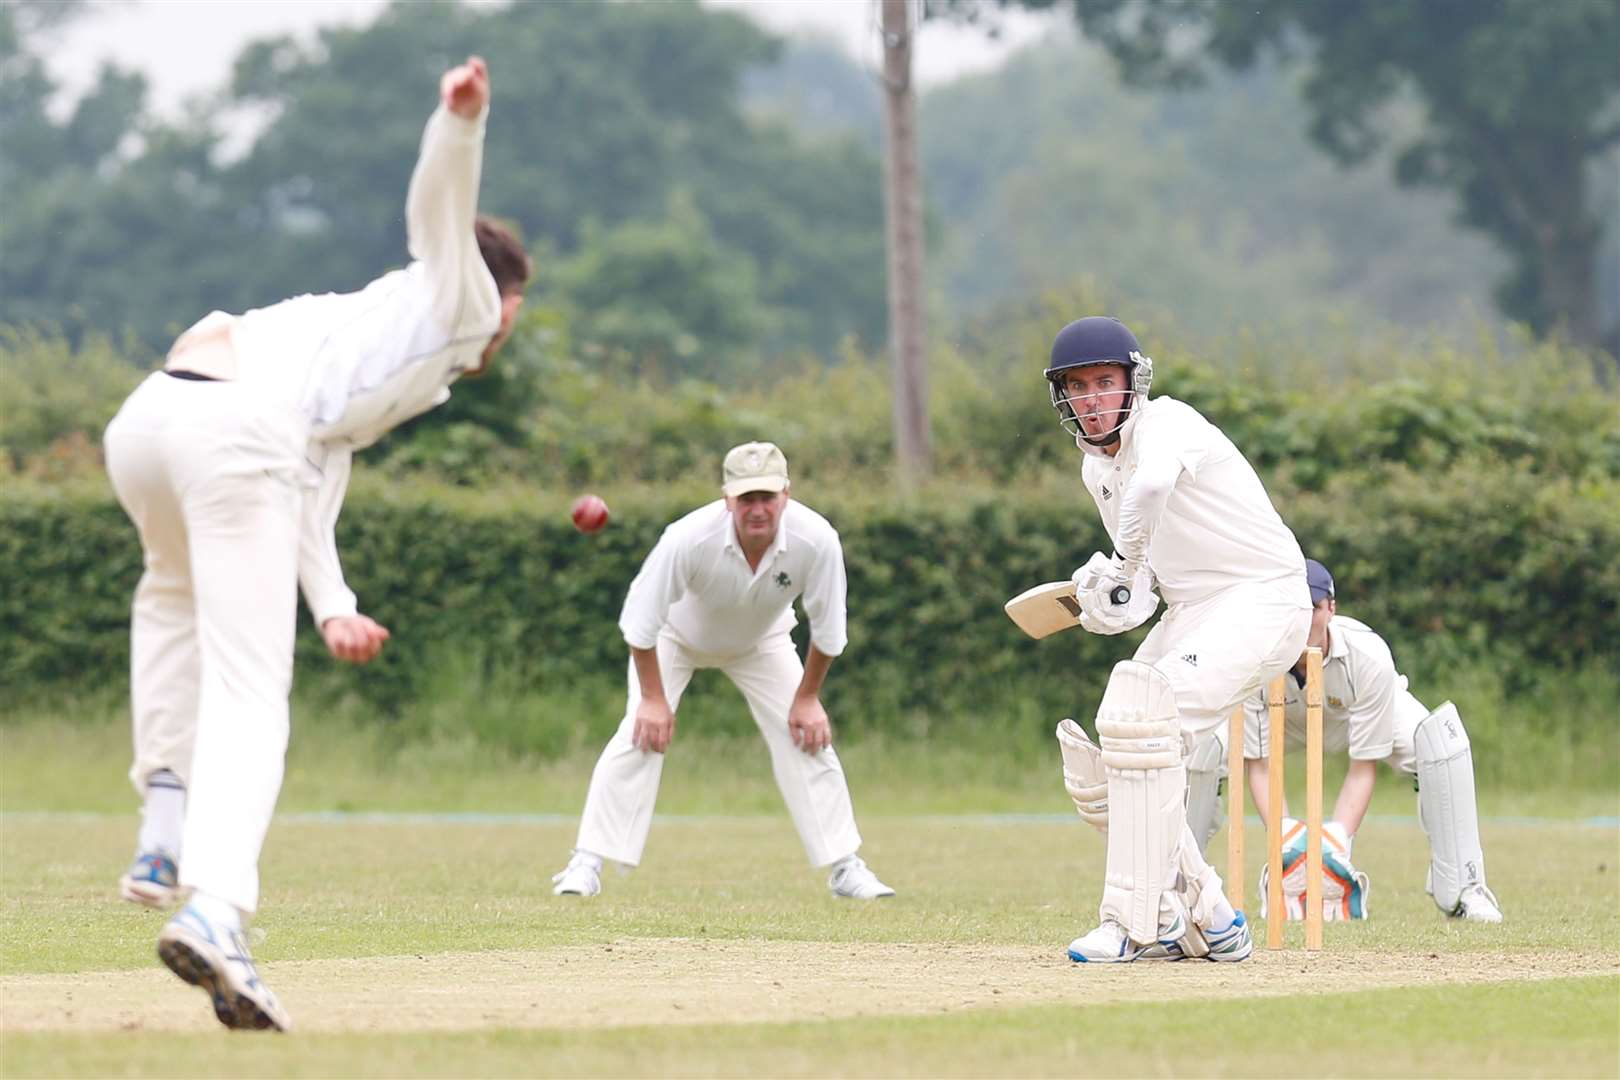 A Headcorn cricketer threw the first overarm bowl in a match. Picture by: Matthew Walker